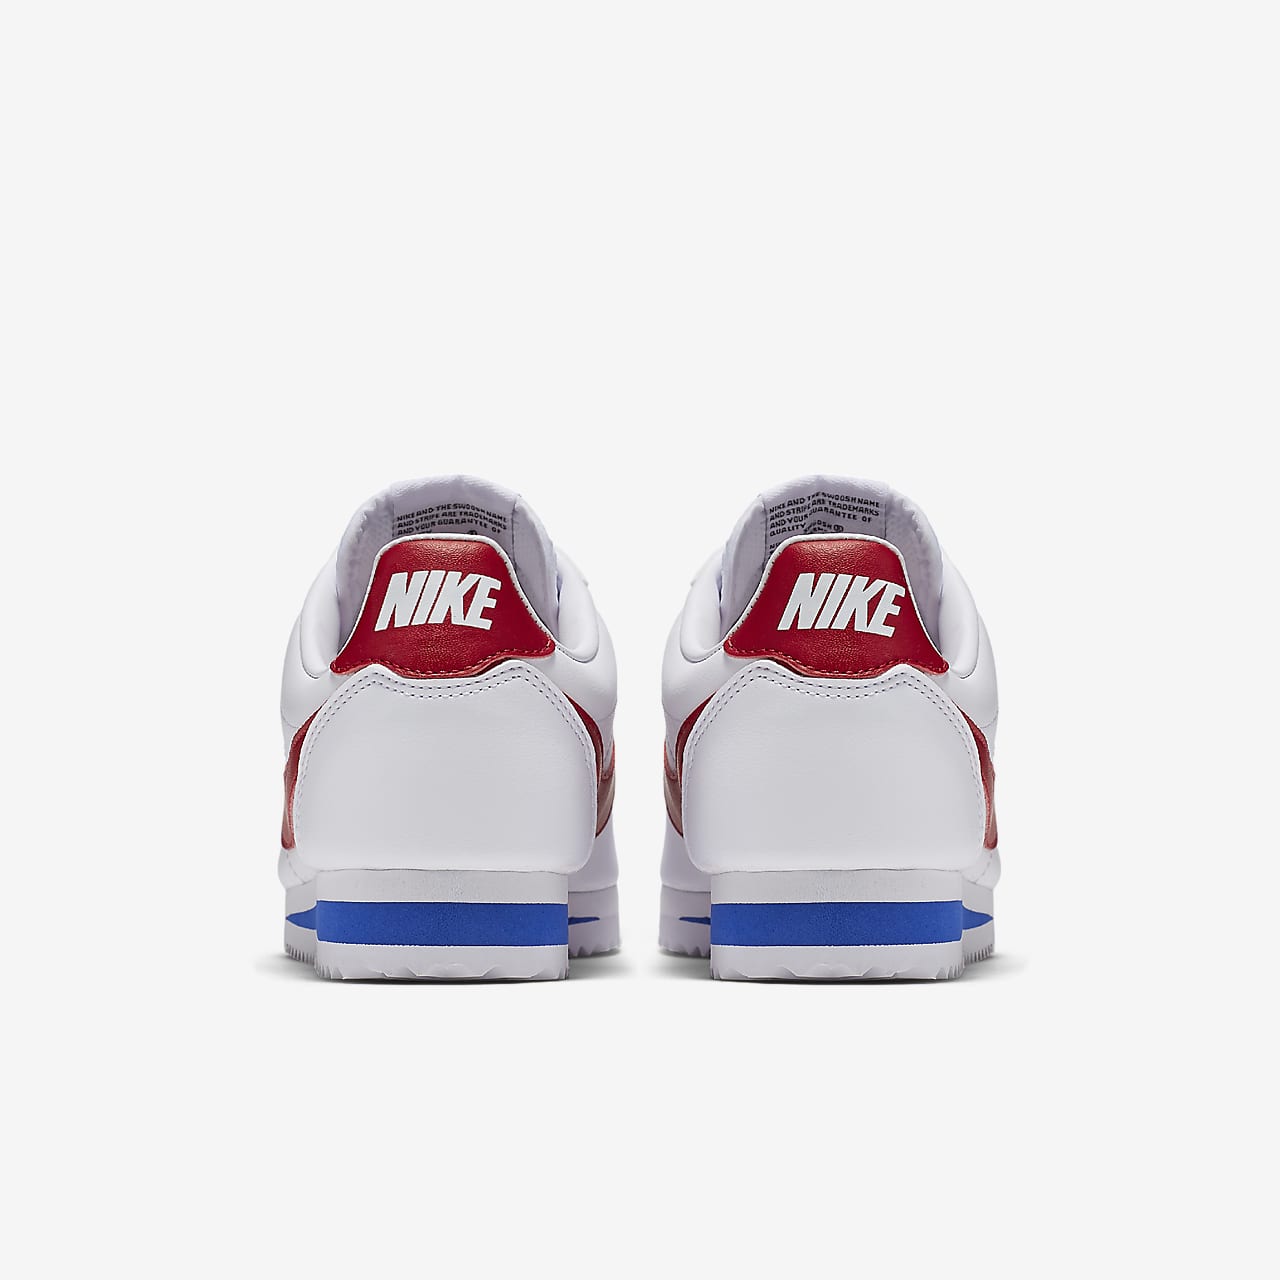 nike cortez womens white and red